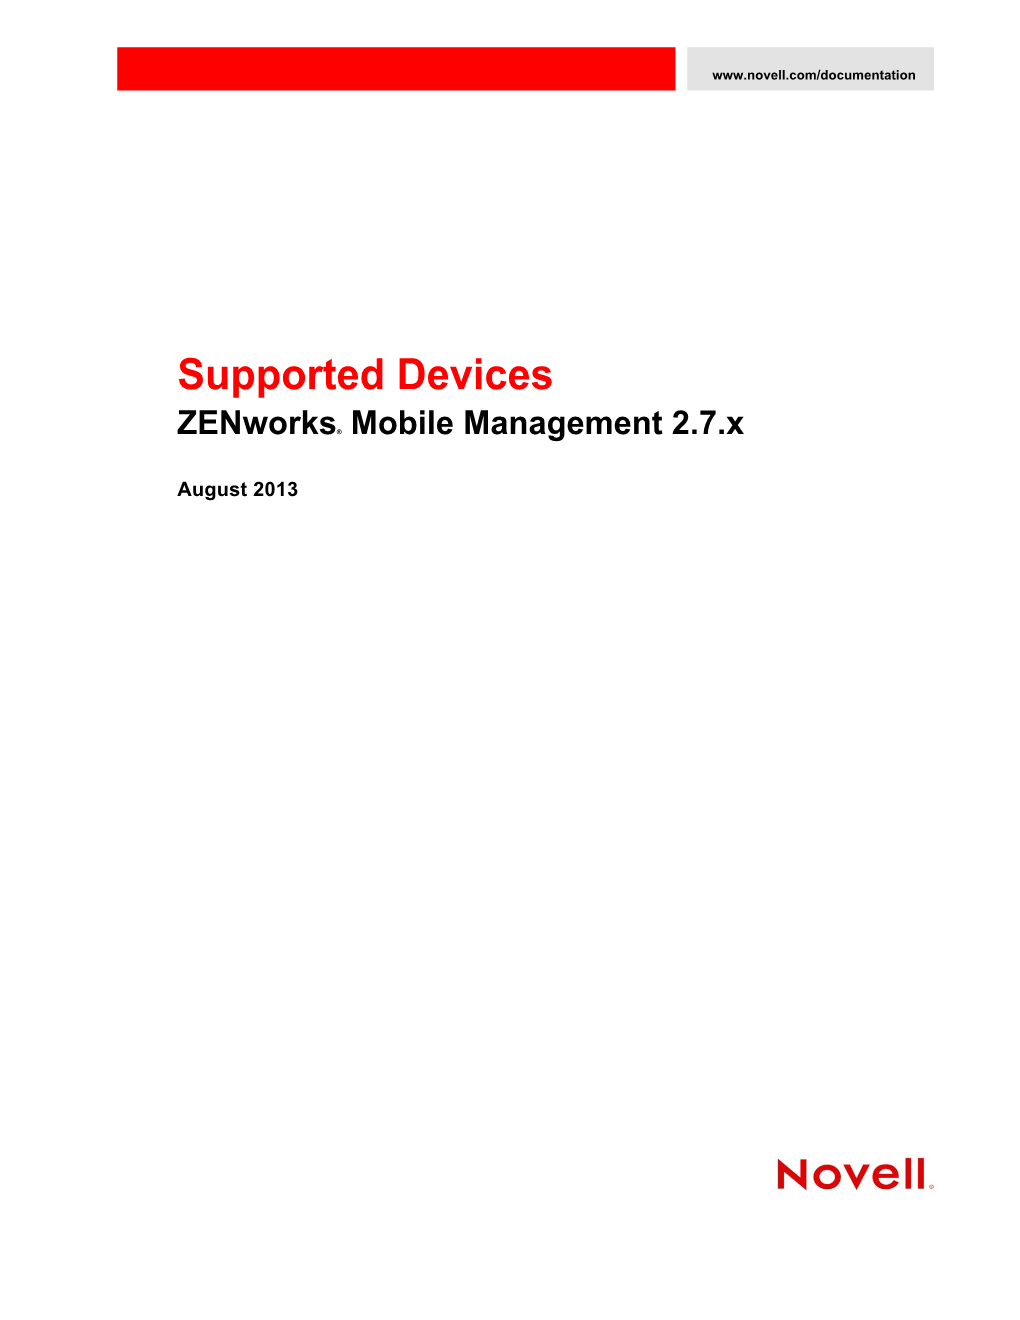 Zenworks Mobile Management 2.7.X Supported Devices